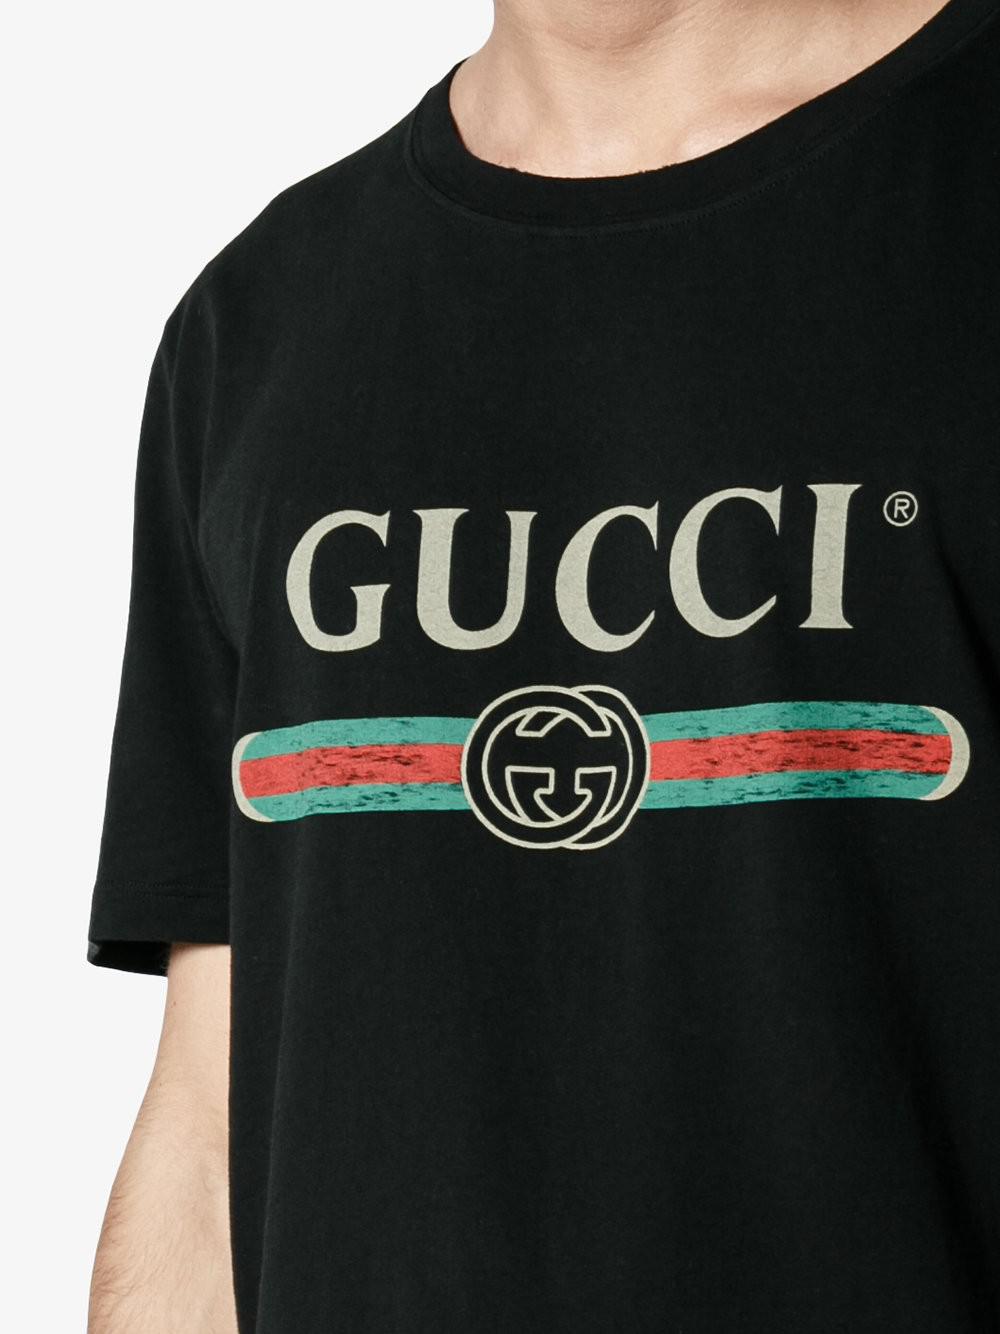 Gucci Cotton Distressed Fake Logo T Shirt in Black for Men - Save 25% - Lyst